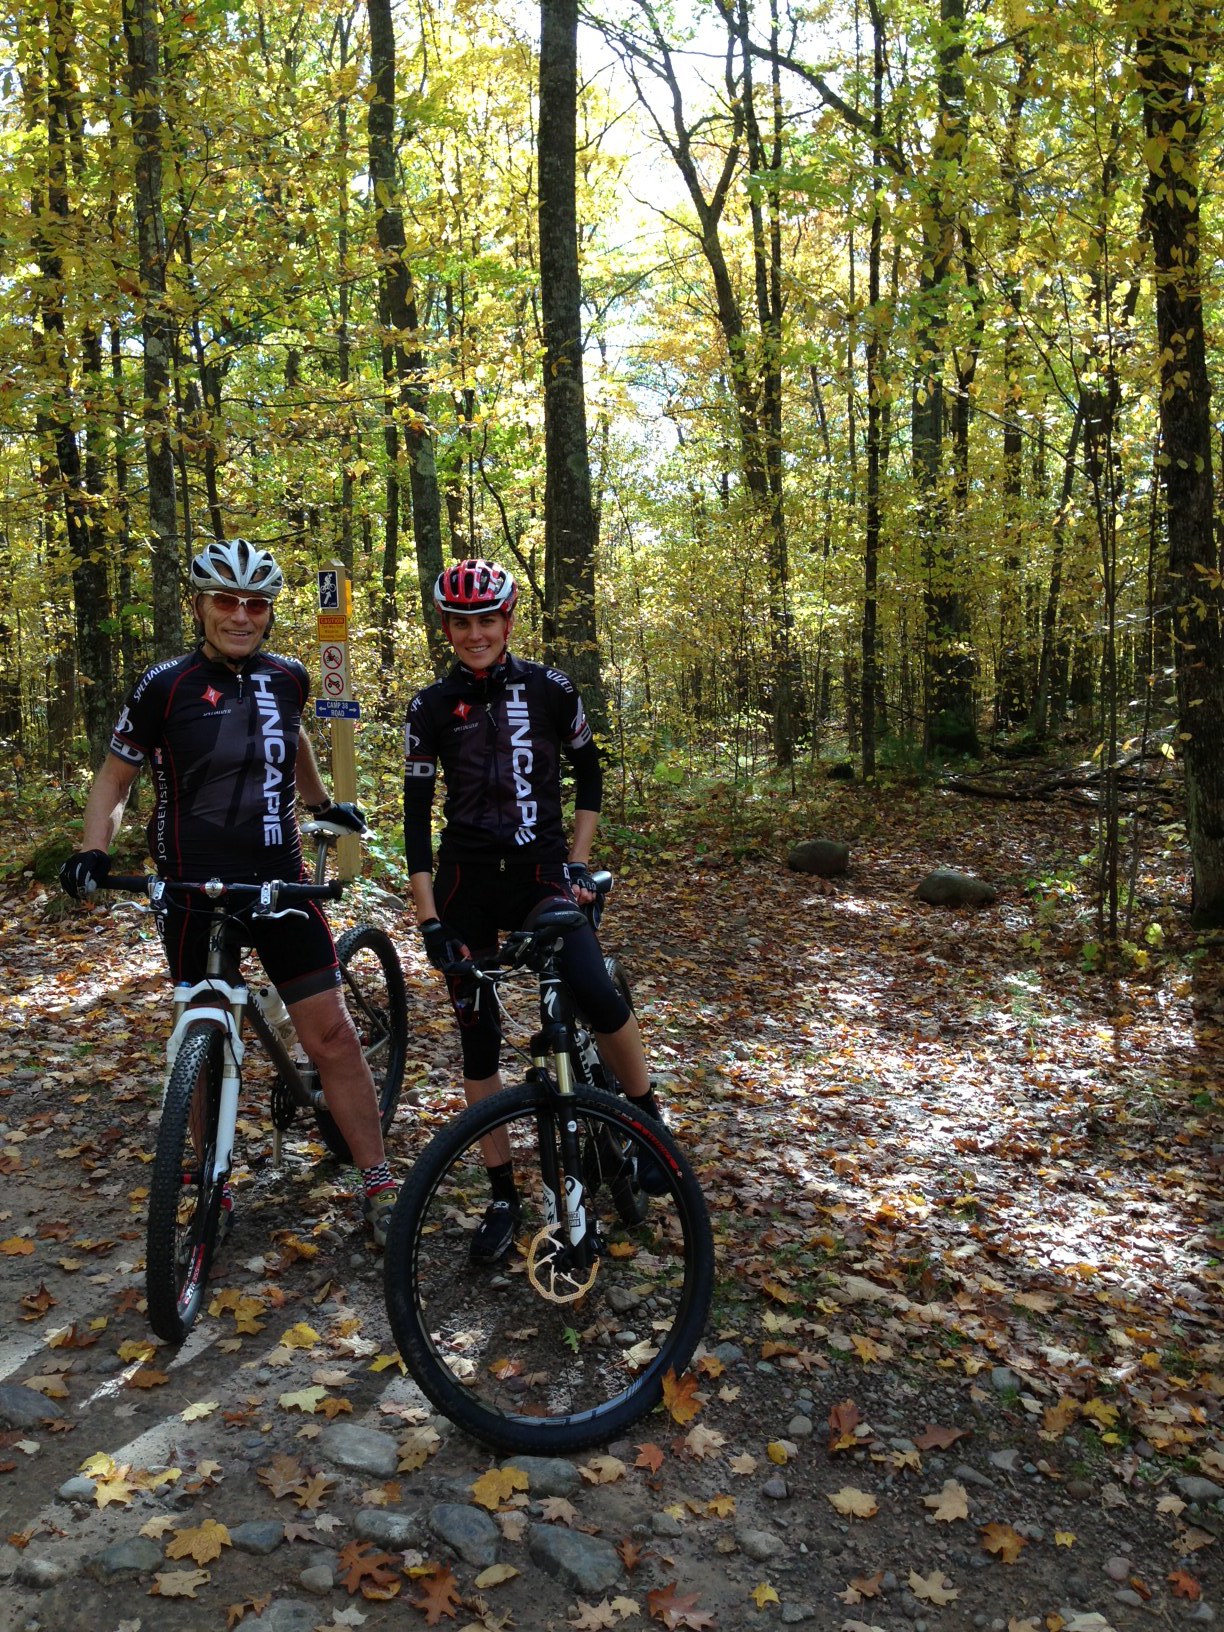 Dennis and Gwen biking in Cable, WI